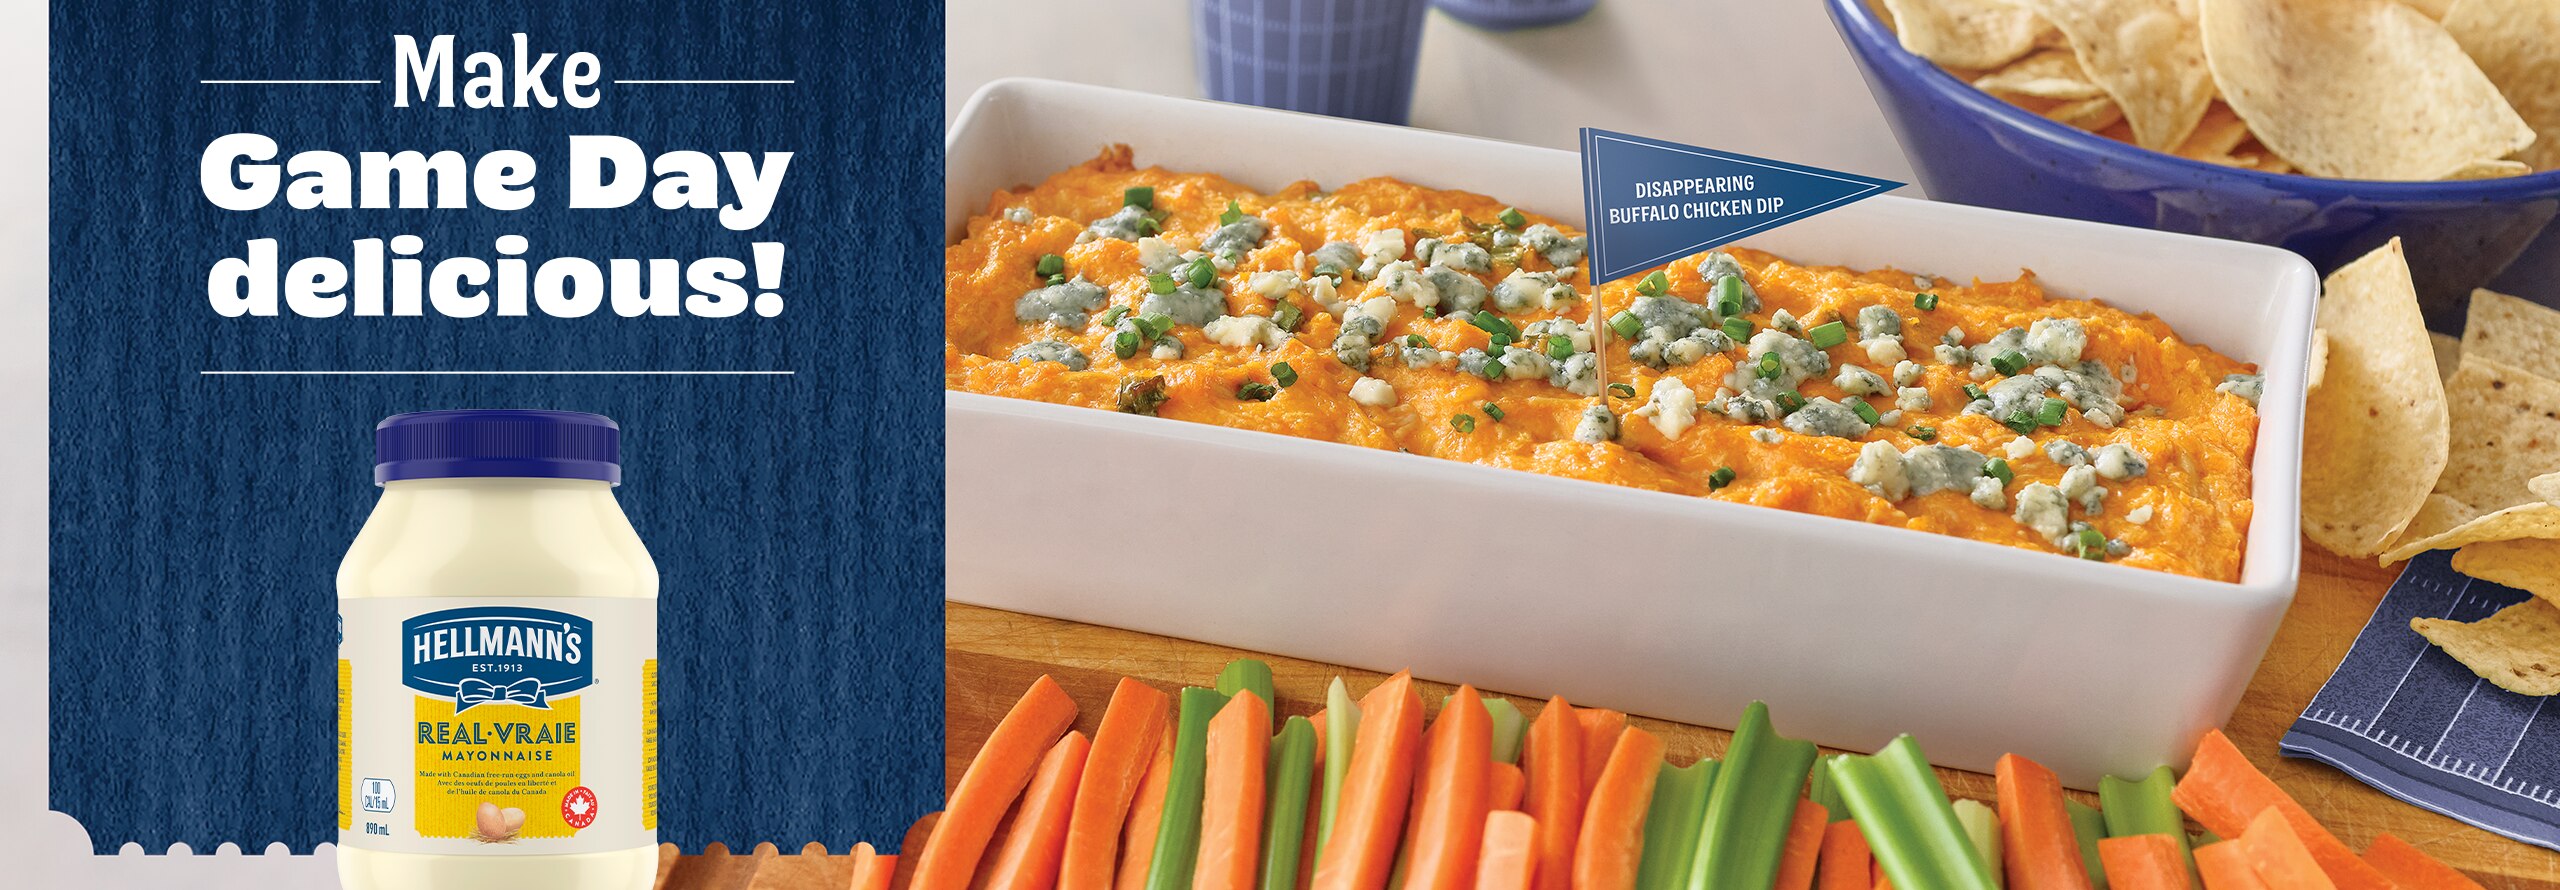 An image showing a dish of Hellmann's Disappearing Buffalo Chicken Dip surrounded by vegetables and chips, alongside the text "Make Game Day delicious!" with a jar of Hellmann's Real Mayonnaise 890mL right below.